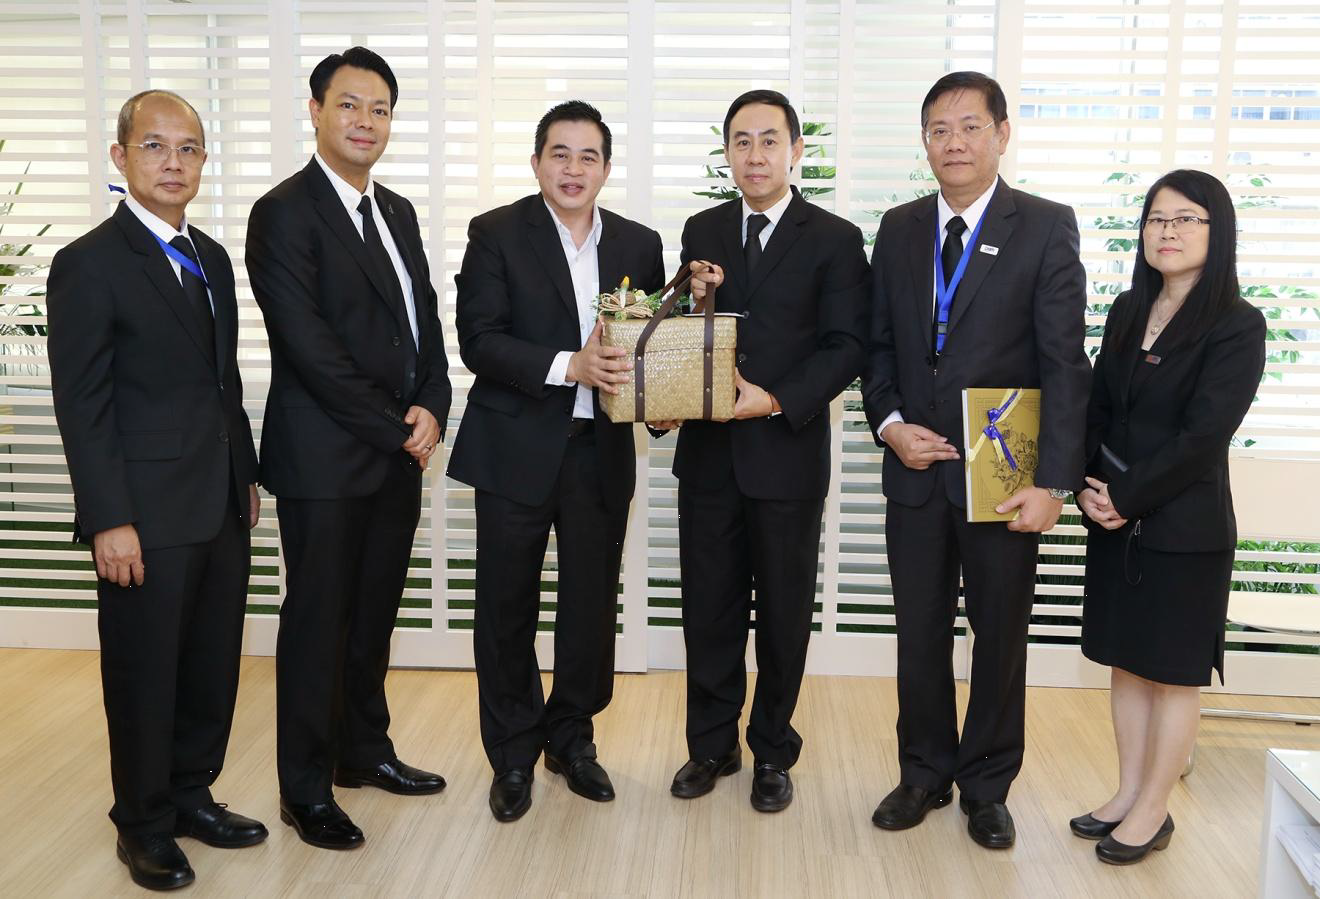 EXIM Thailand Visits Ministry of Finance to Extend New Year 2017 Greetings